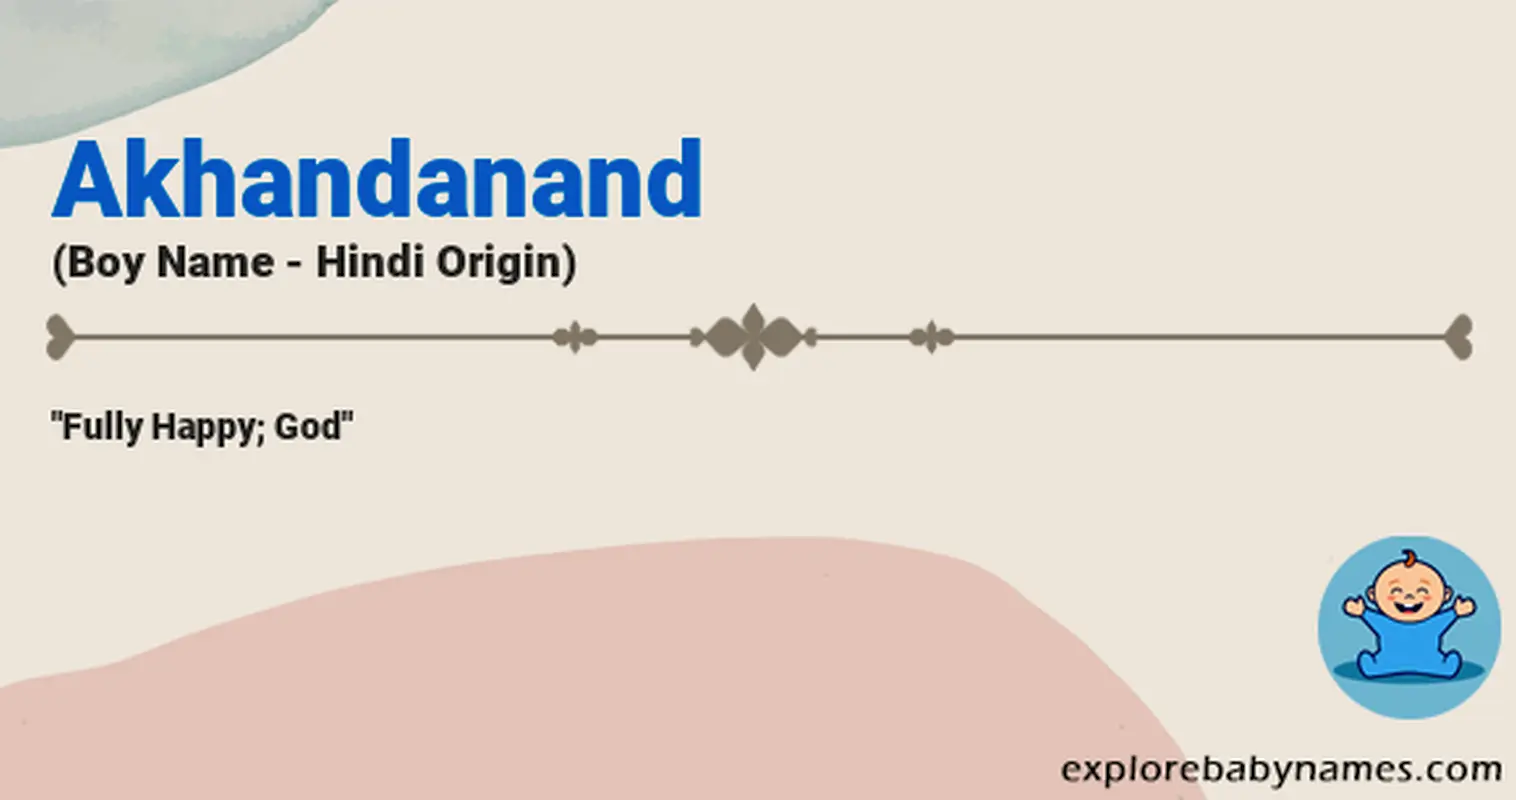 Meaning of Akhandanand